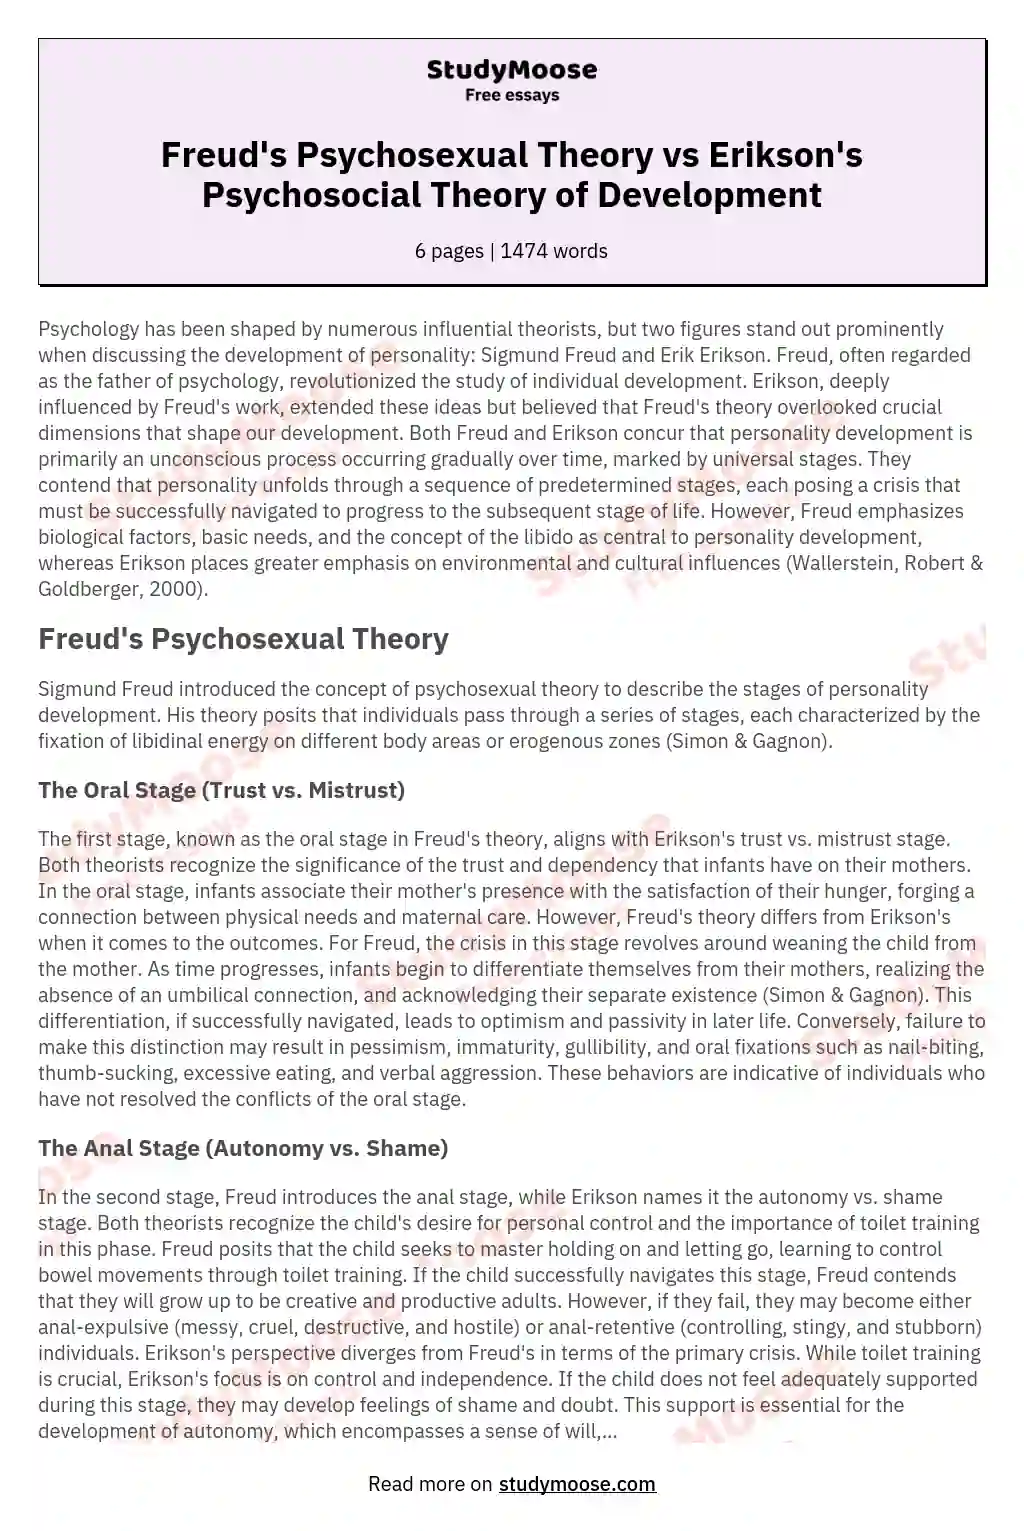 Psychosexual stages vs. psychosocial stages